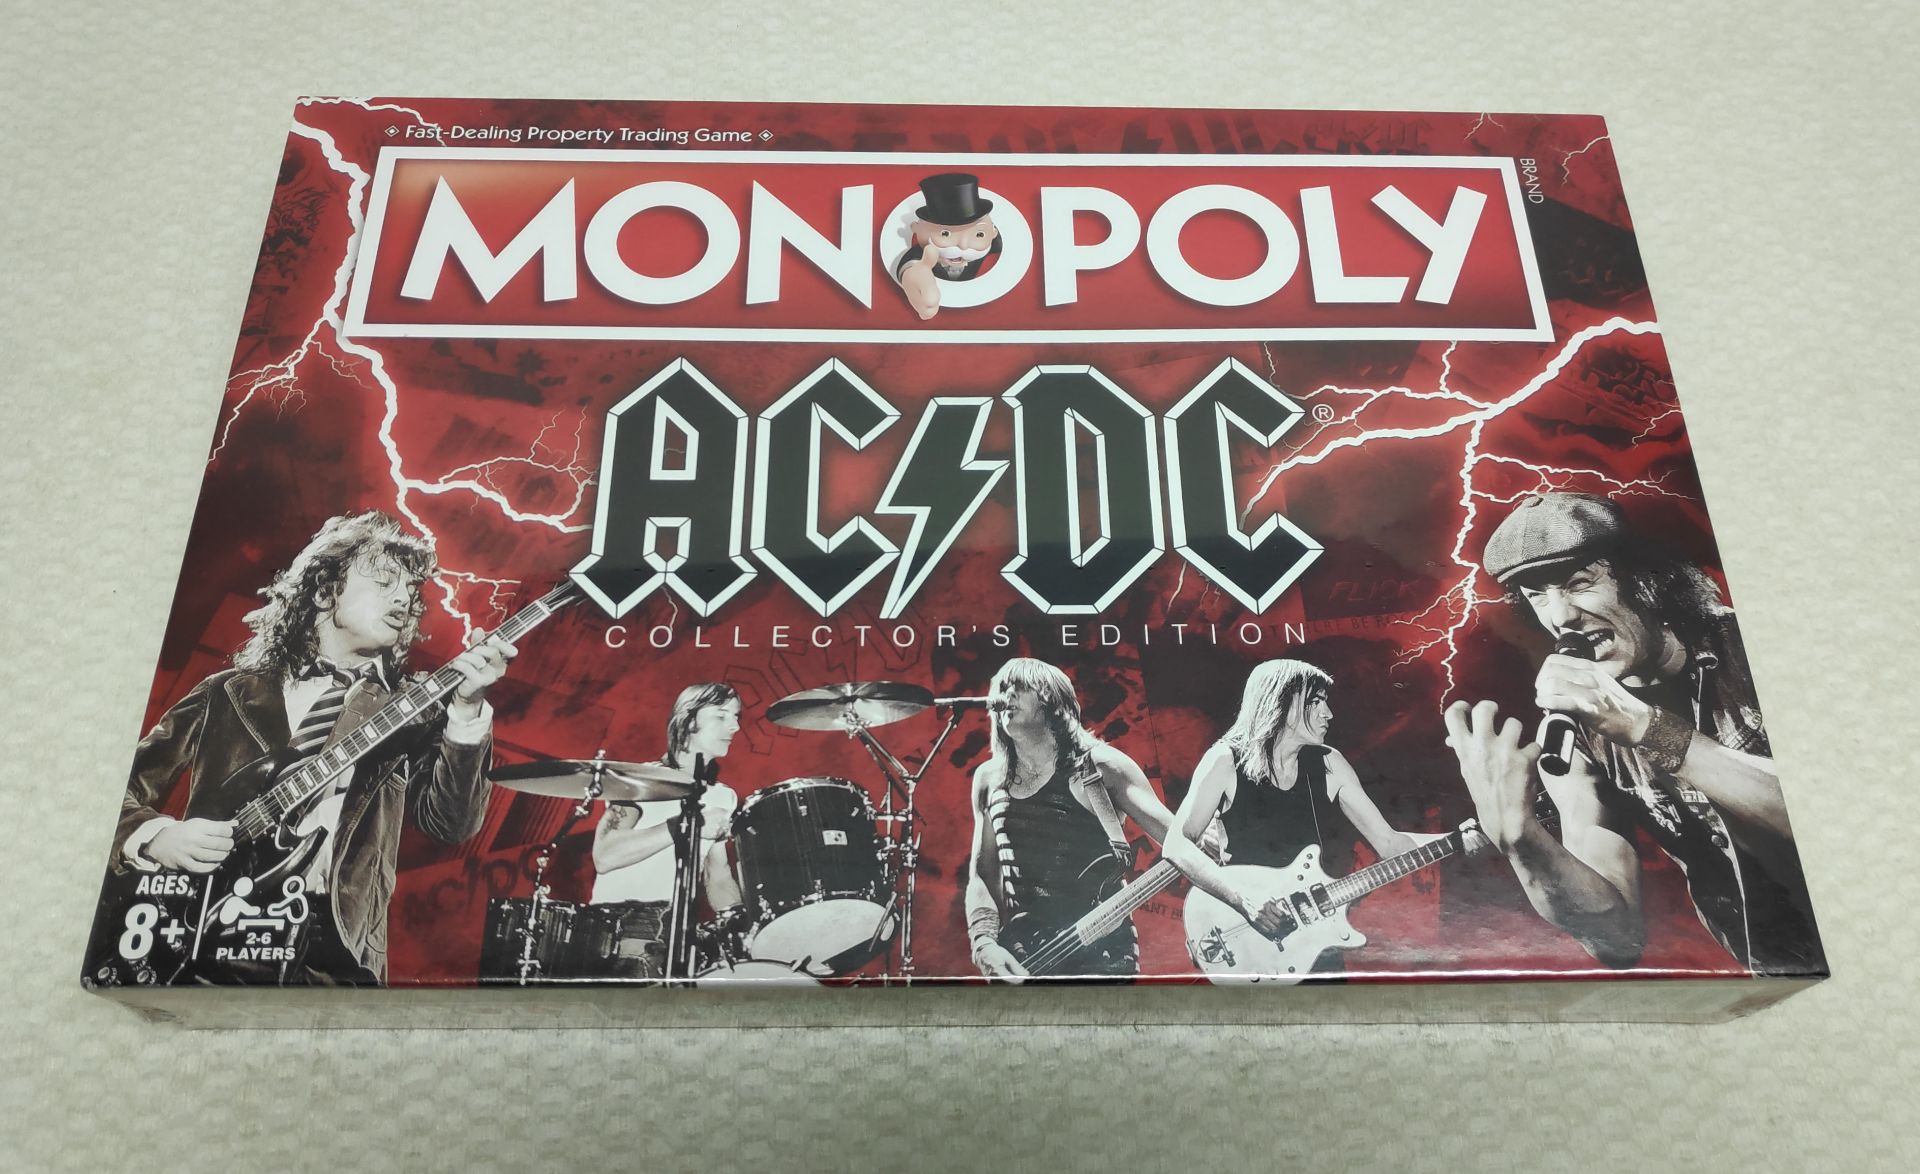 1 x AC/DC Collector's Edition Monopoly - New/Sealed - CL720 - Location: Altrincham WA14<BR - Image 6 of 8